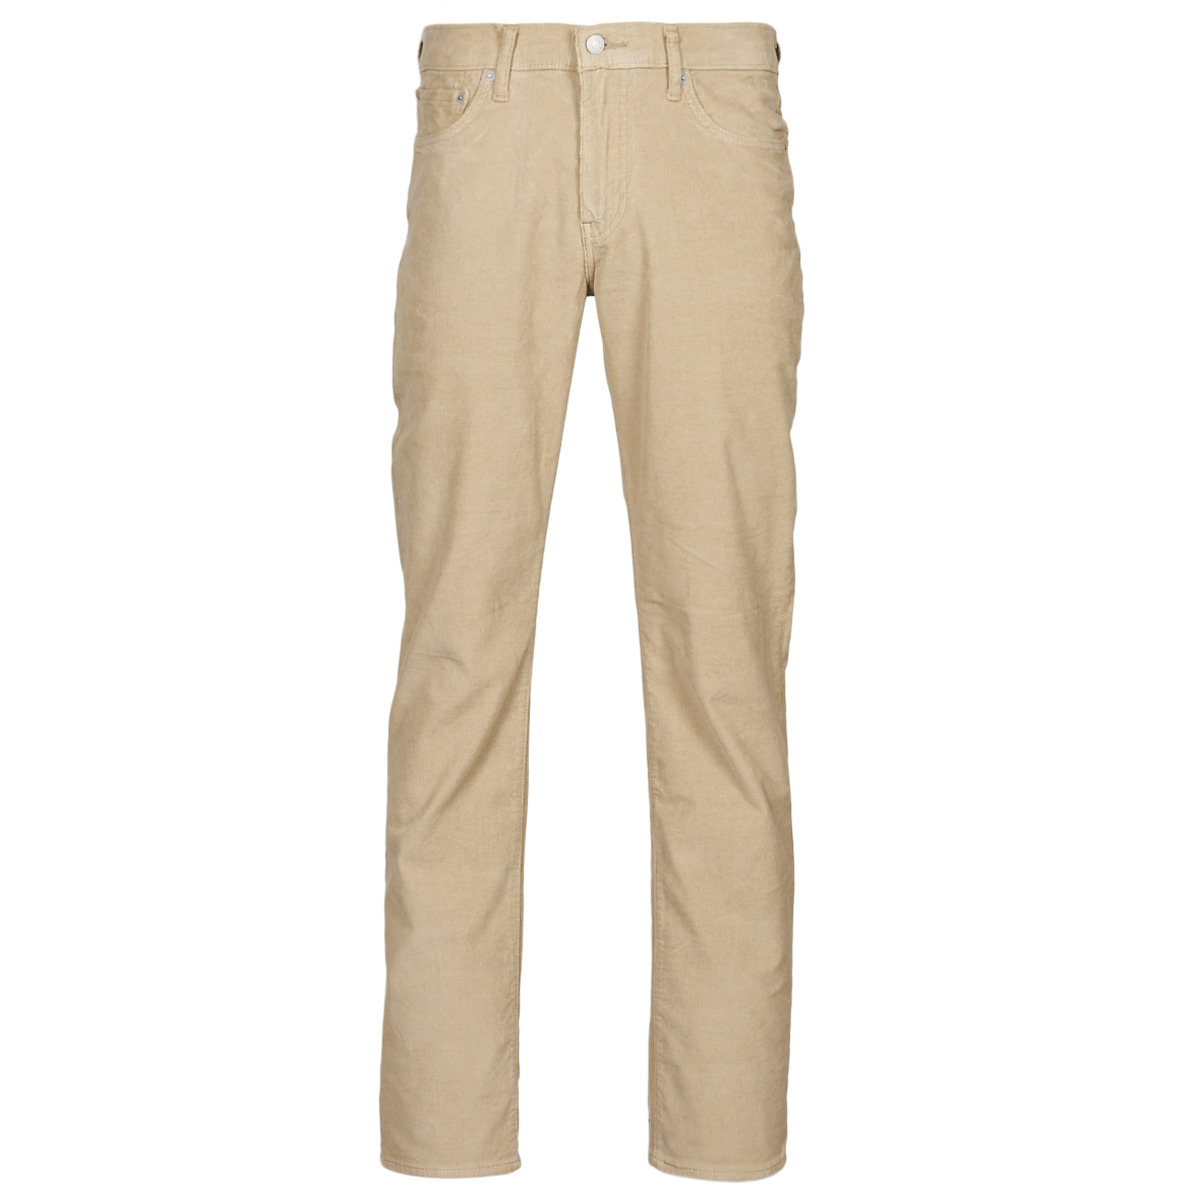 Spartoo - Trousers Beige by Levi's GOOFASH